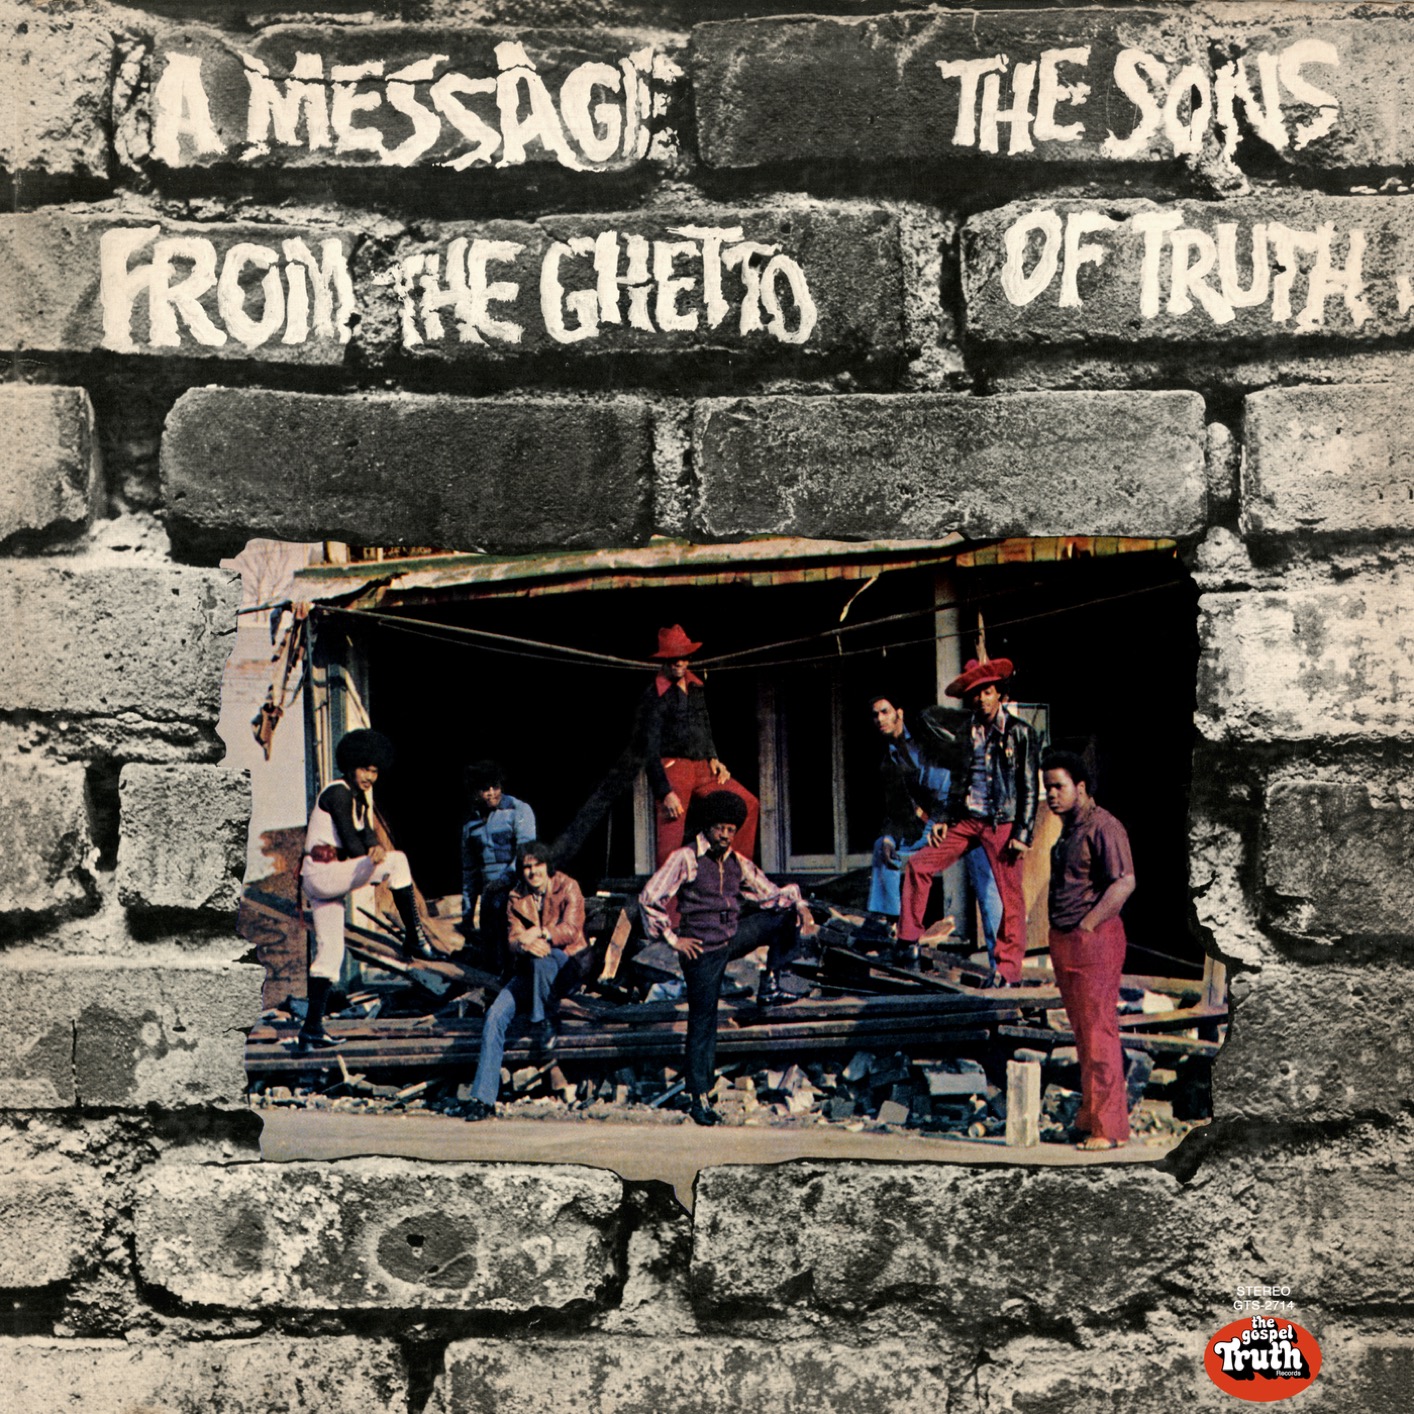 The Sons Of Truth - A Message From The Ghetto (1972/2017) [FLAC 24bit/192kHz]